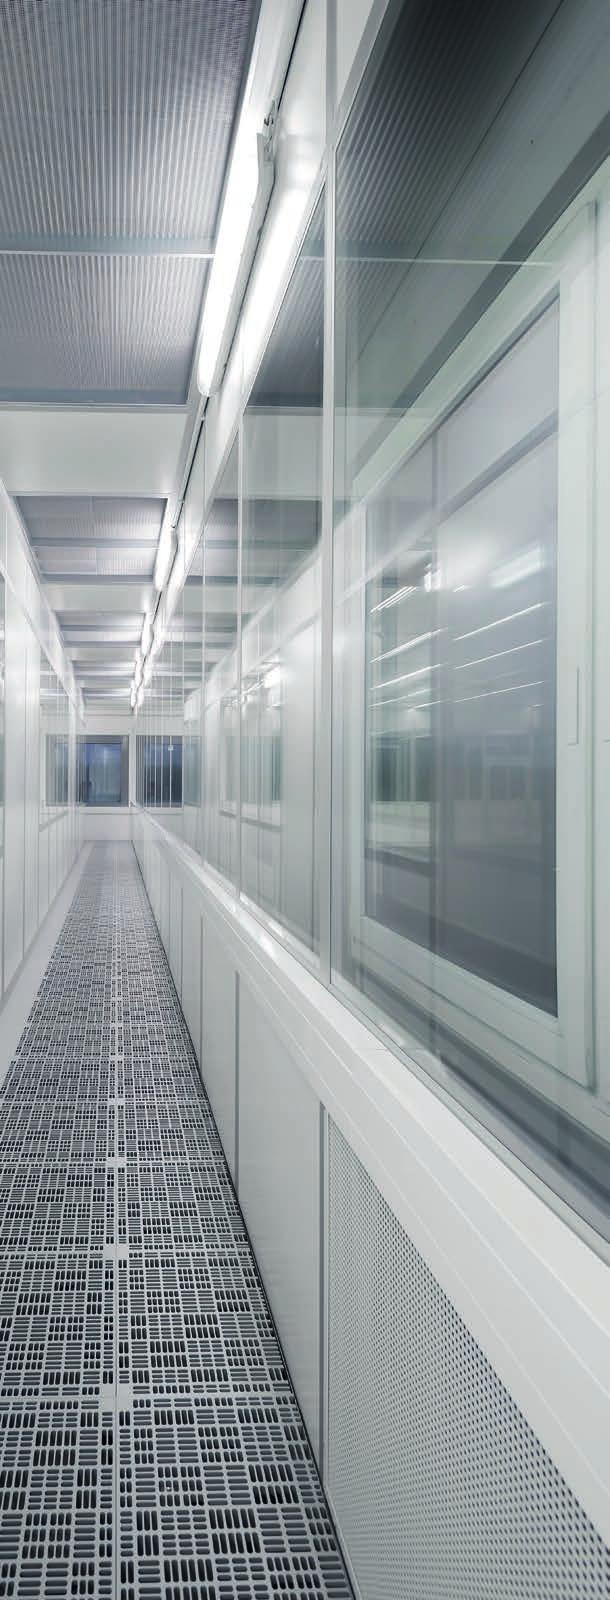 ELECTRONICS AND SEMICONDUCTORS Wall systems Ceiling systems Door systems All wall systems comply with the EN ISO 14644-4 cleanroom specification and are certified by the Fraunhofer institute.